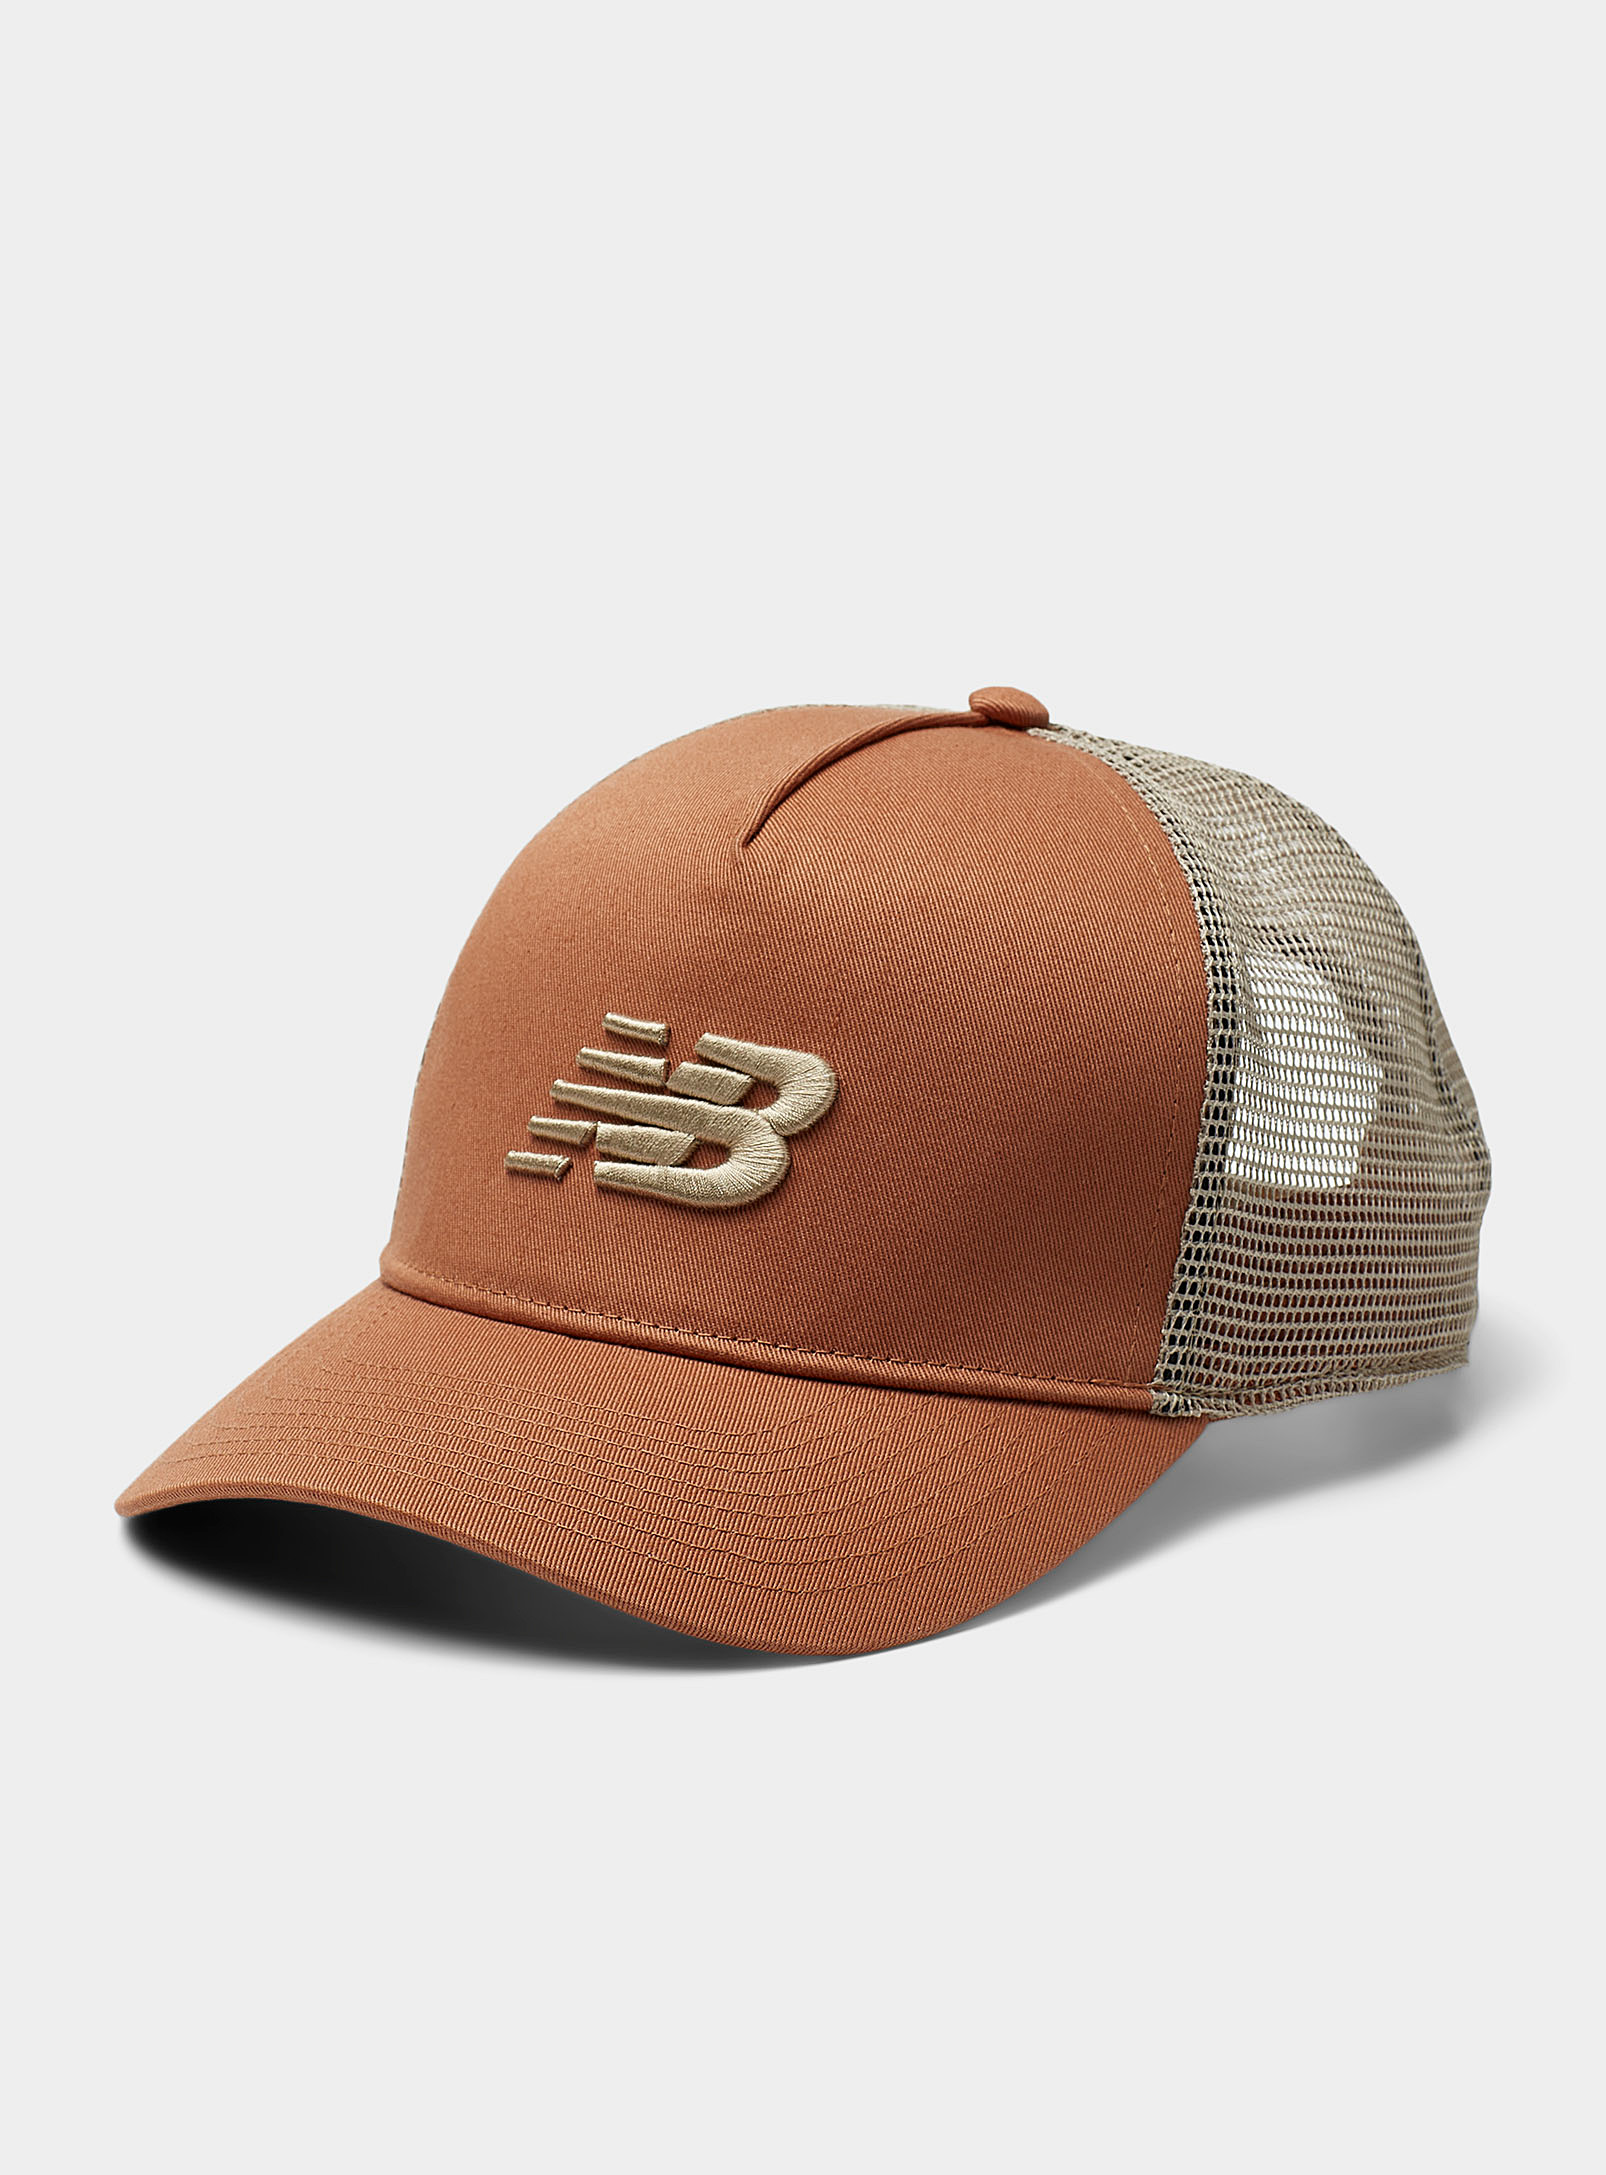 New Balance Embroidered Logo Trucker Cap In Brown